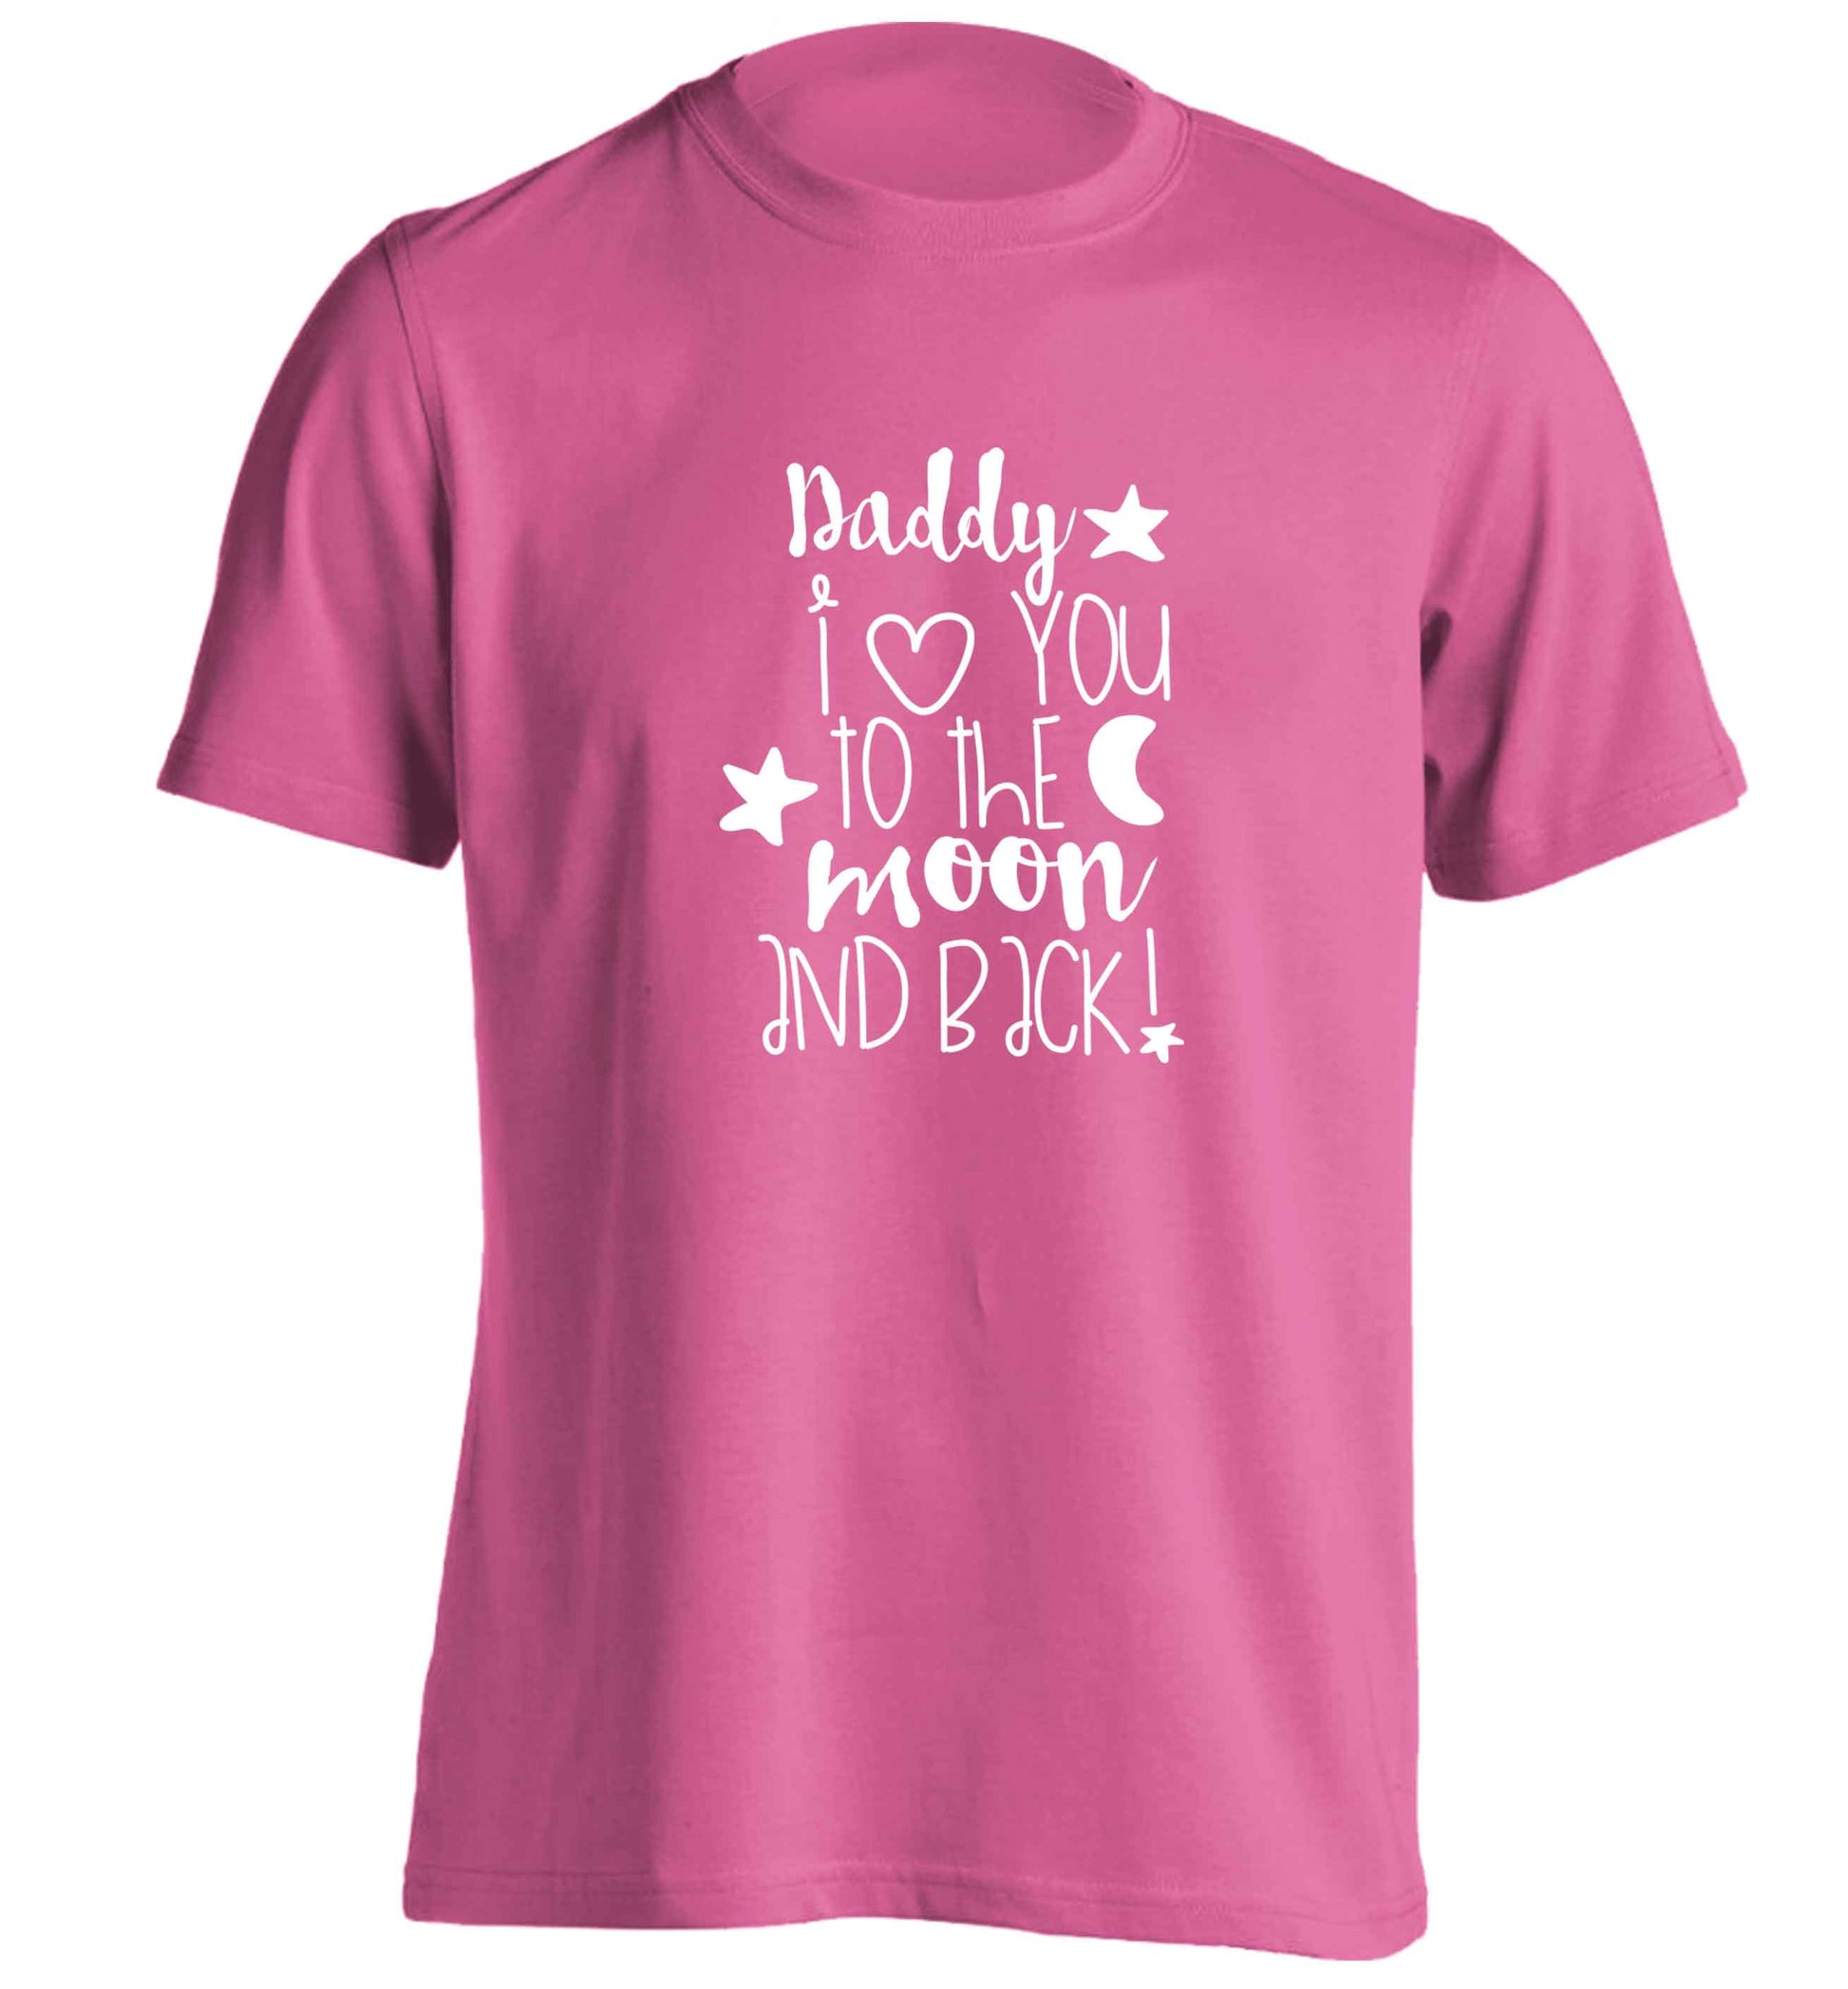 Daddy I love you to the moon and back adults unisex pink Tshirt 2XL